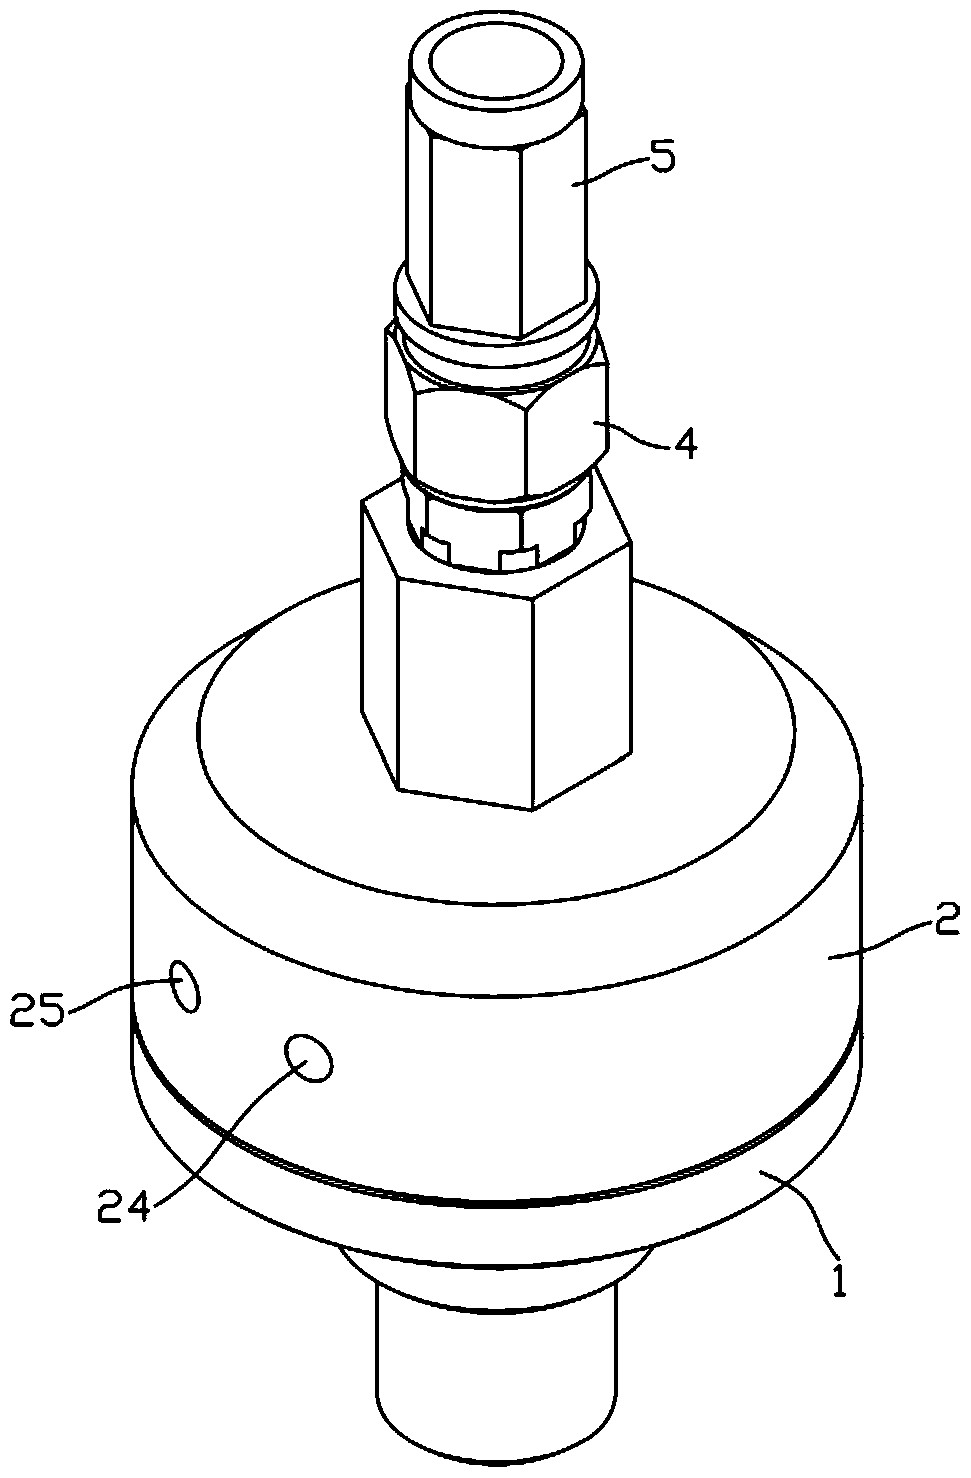 A cut-off valve applied to silicone pipeline